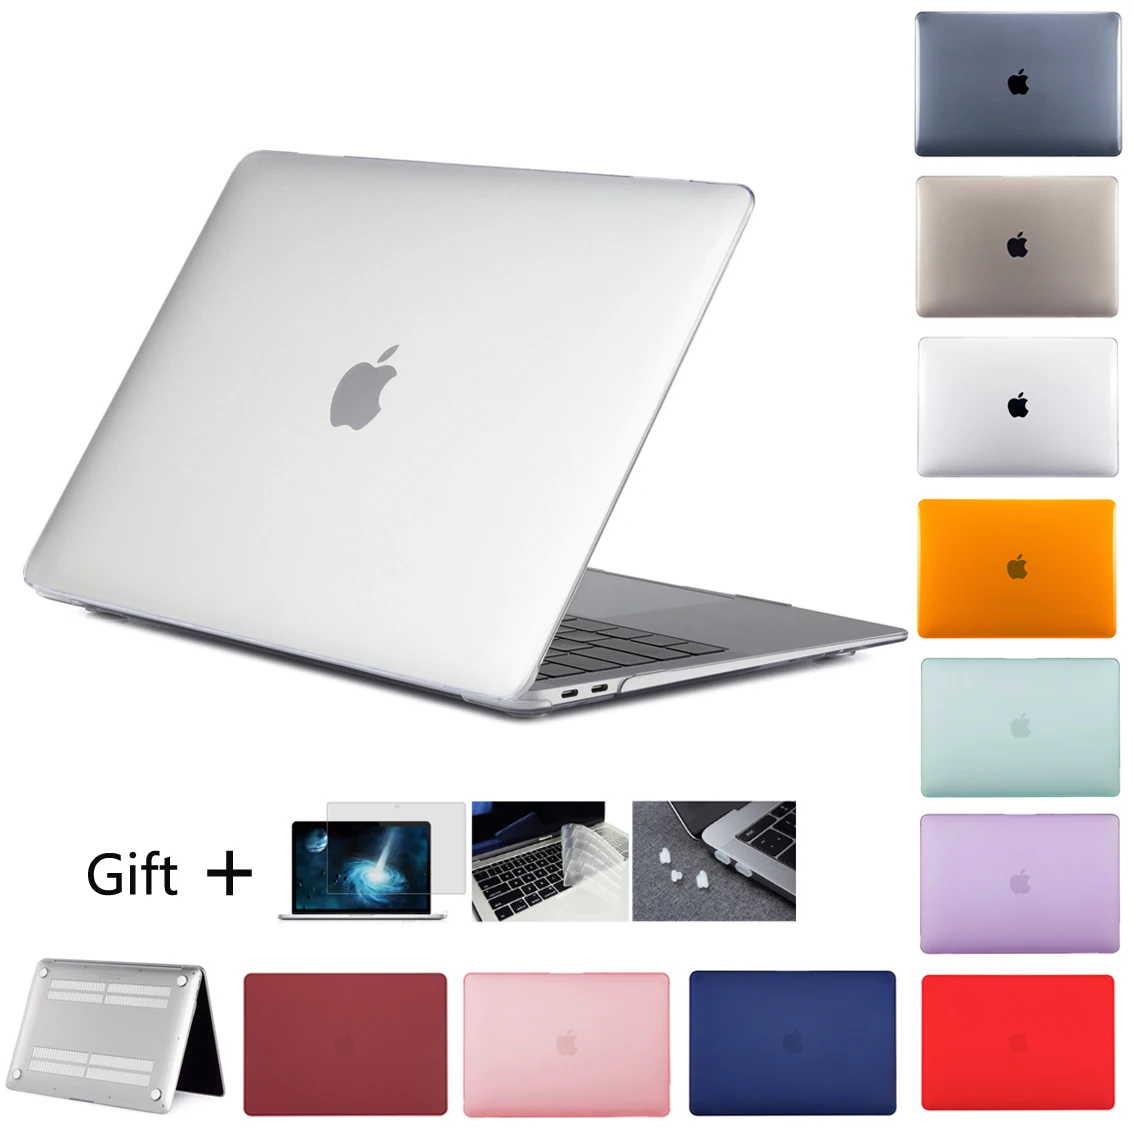 

New Crystal\Matte Case For Apple Macbook Air Pro Retina M1 Chip 11 12 13 15 16 inch ,Case For 2020 Pro13 A2338 A2289 A2179+gift